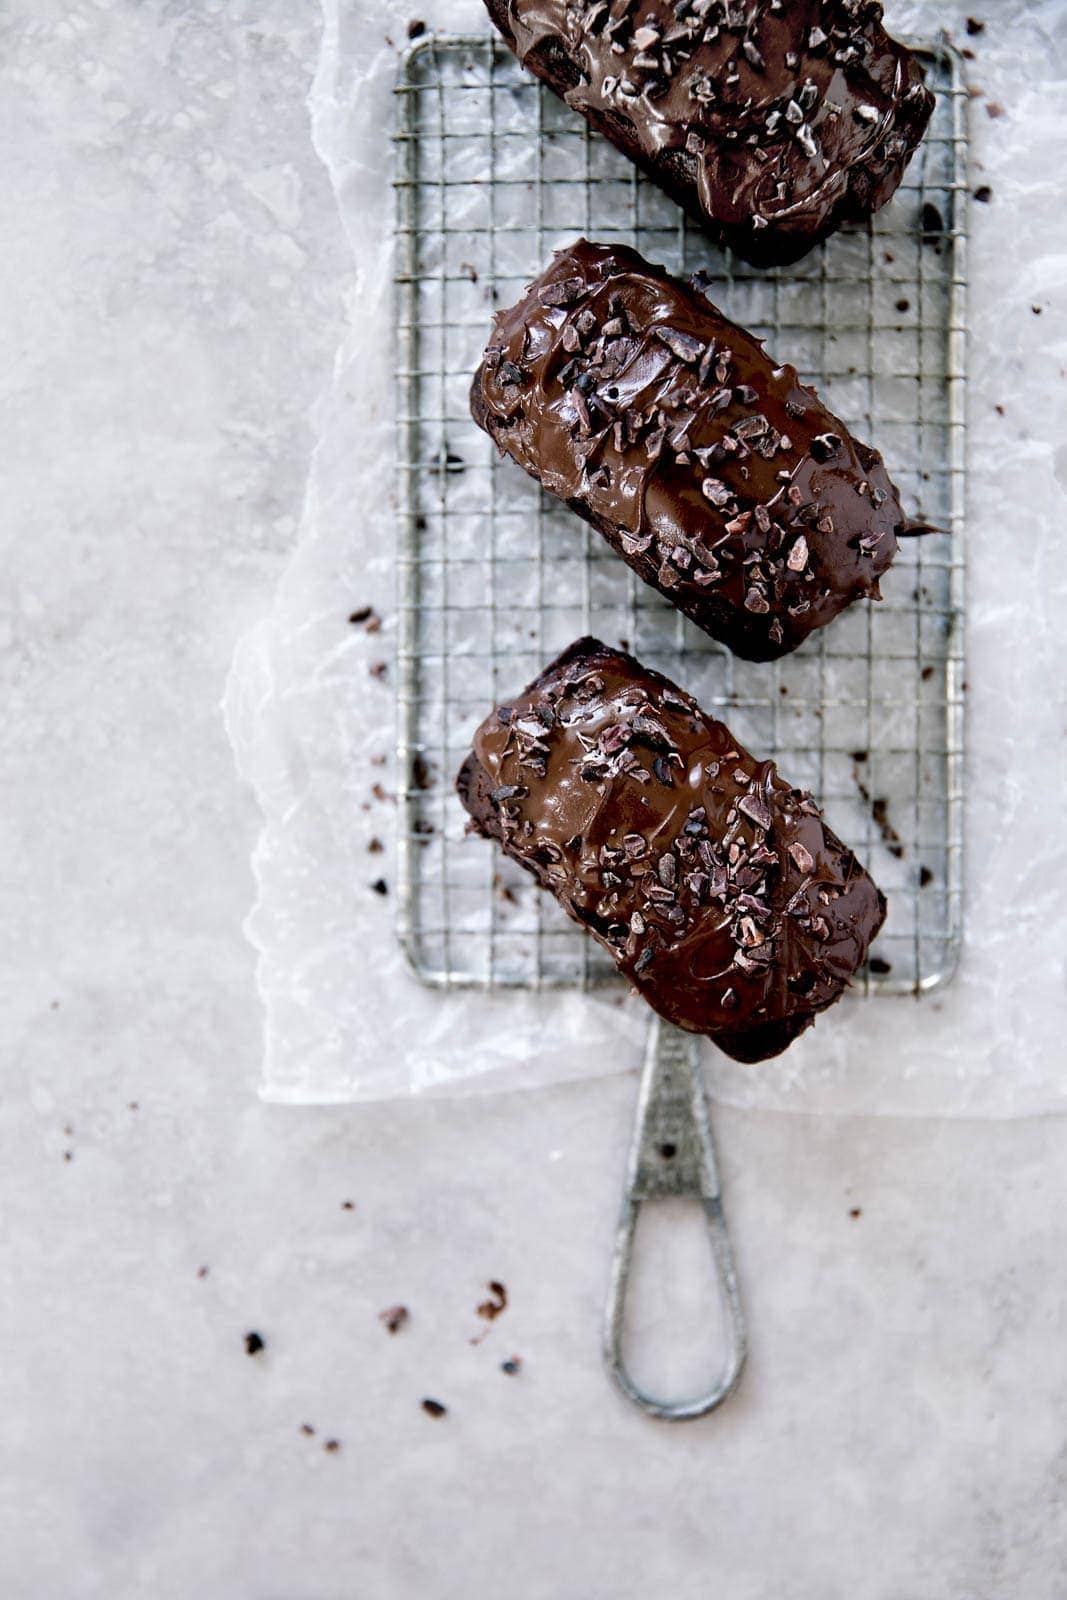 Mini chocolate zucchini breads. Because a quarter of the size is twice the fun!